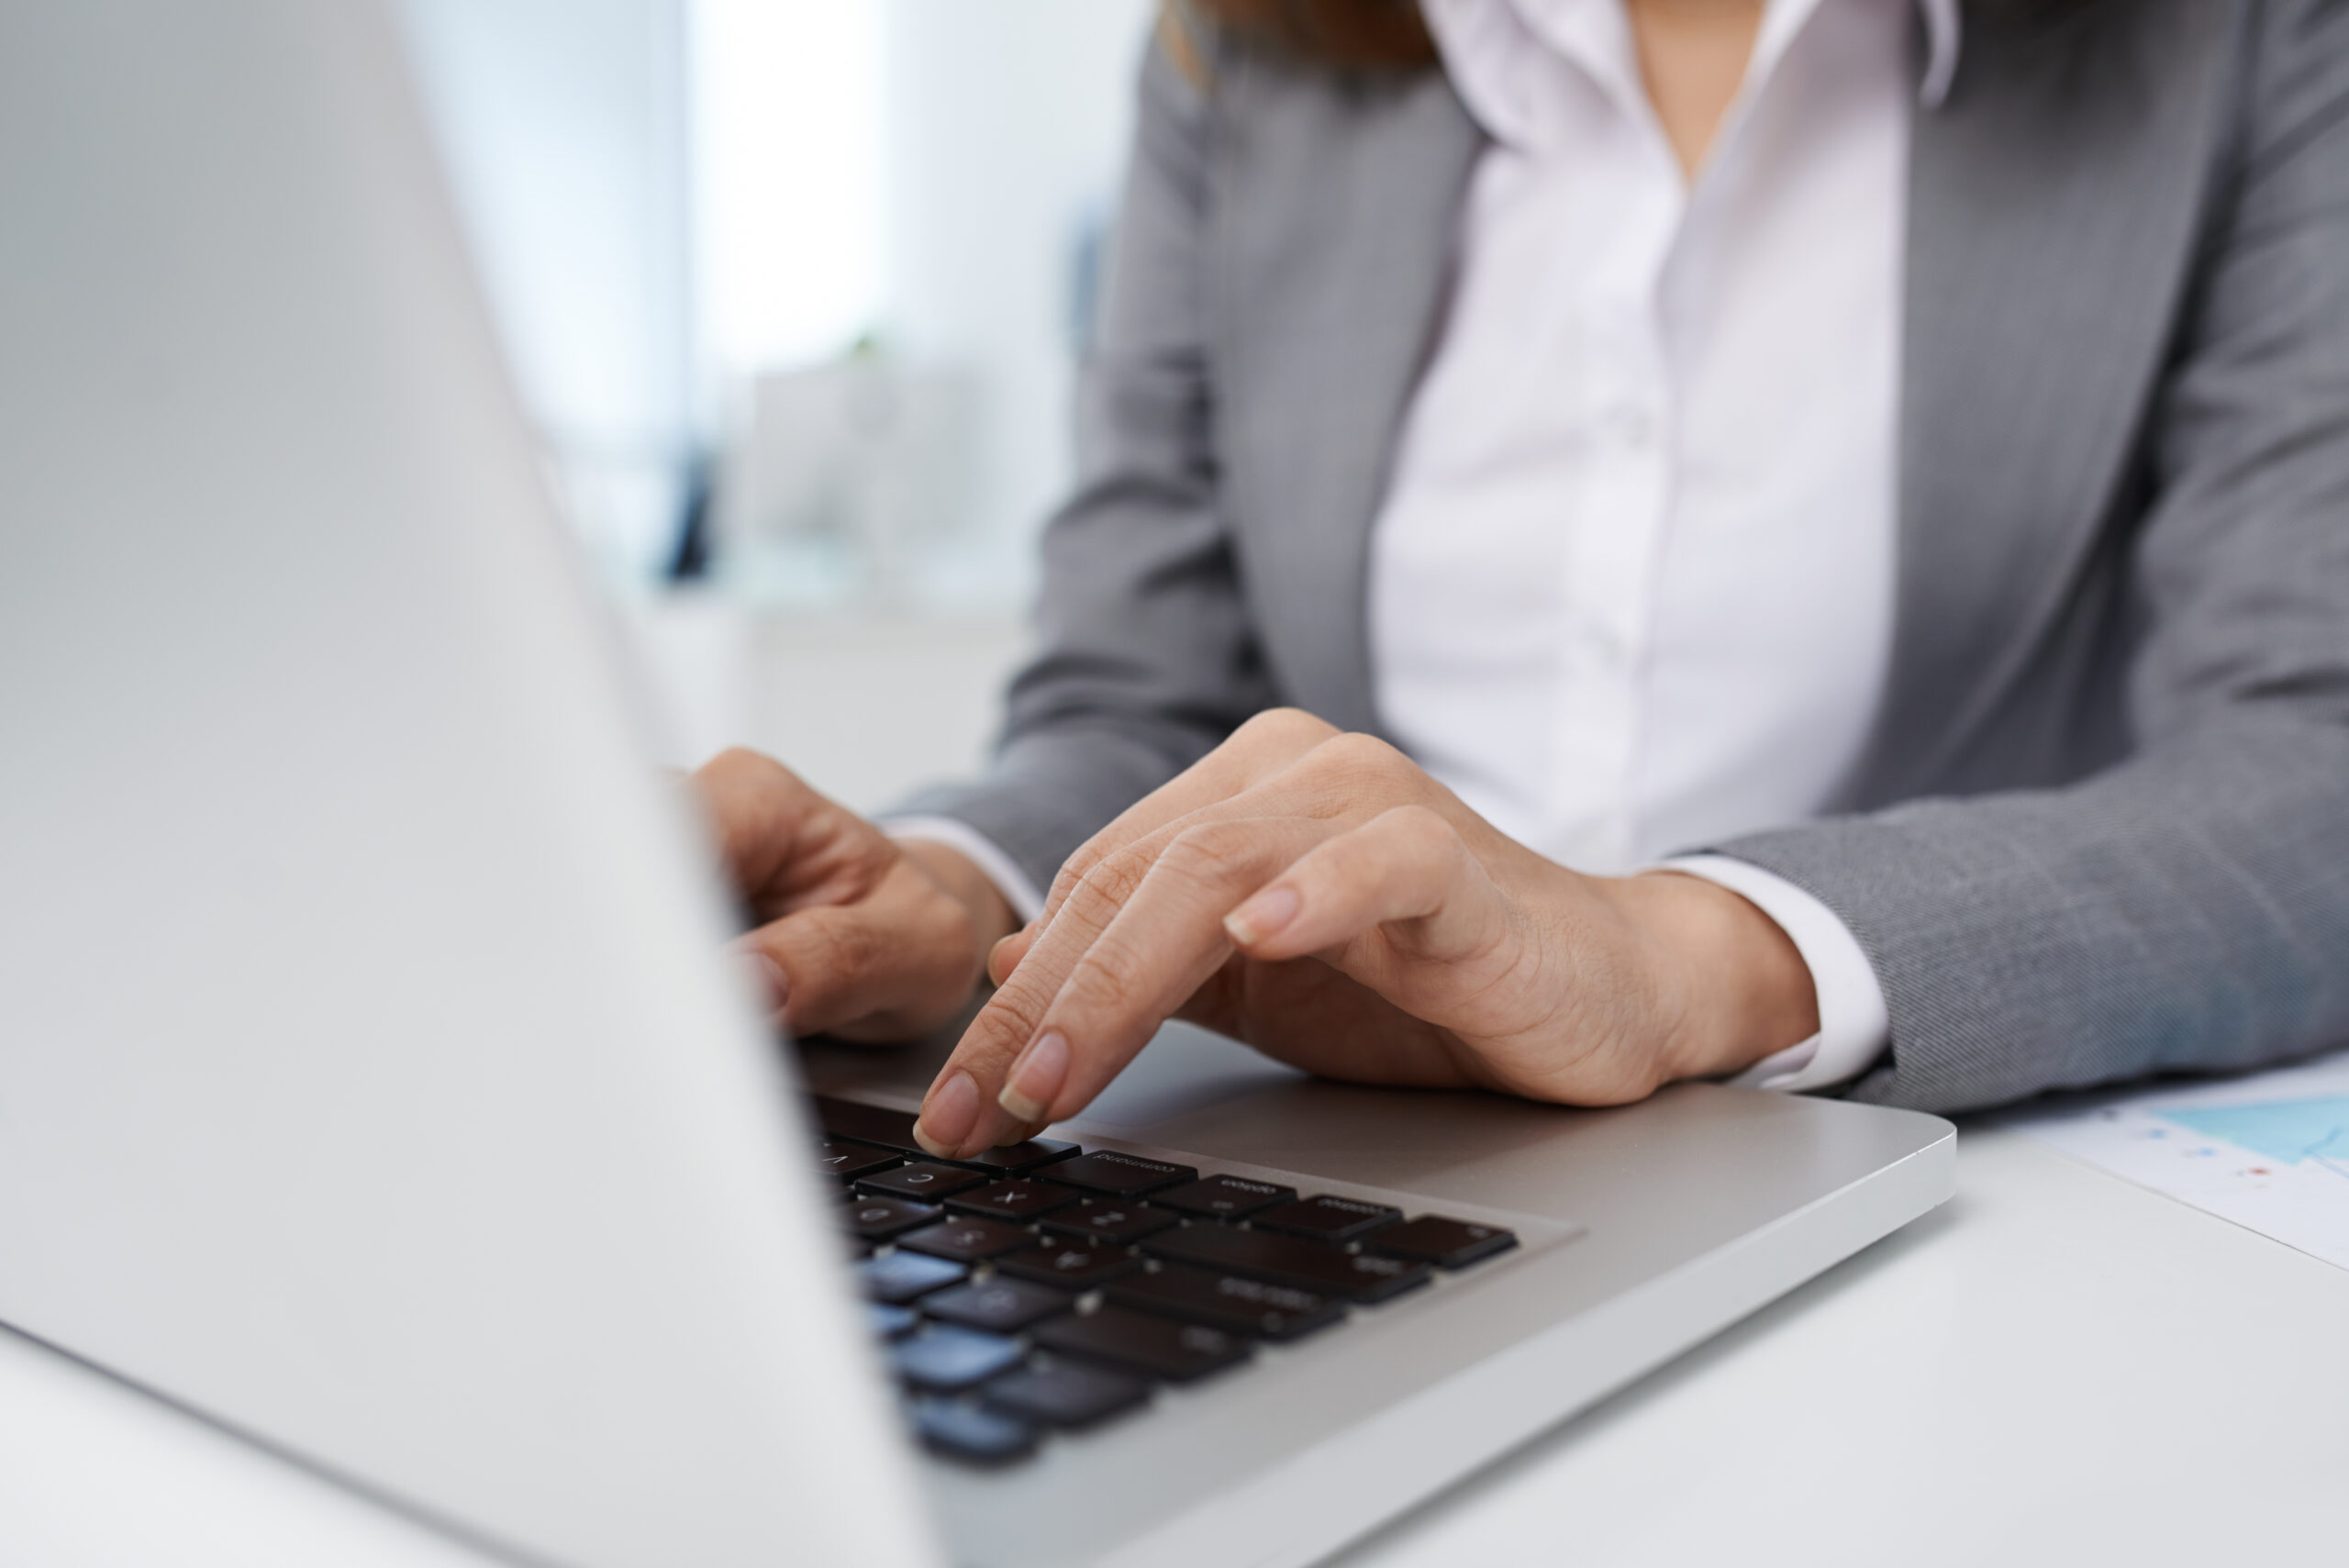 Close-up image of business lady working on laptop